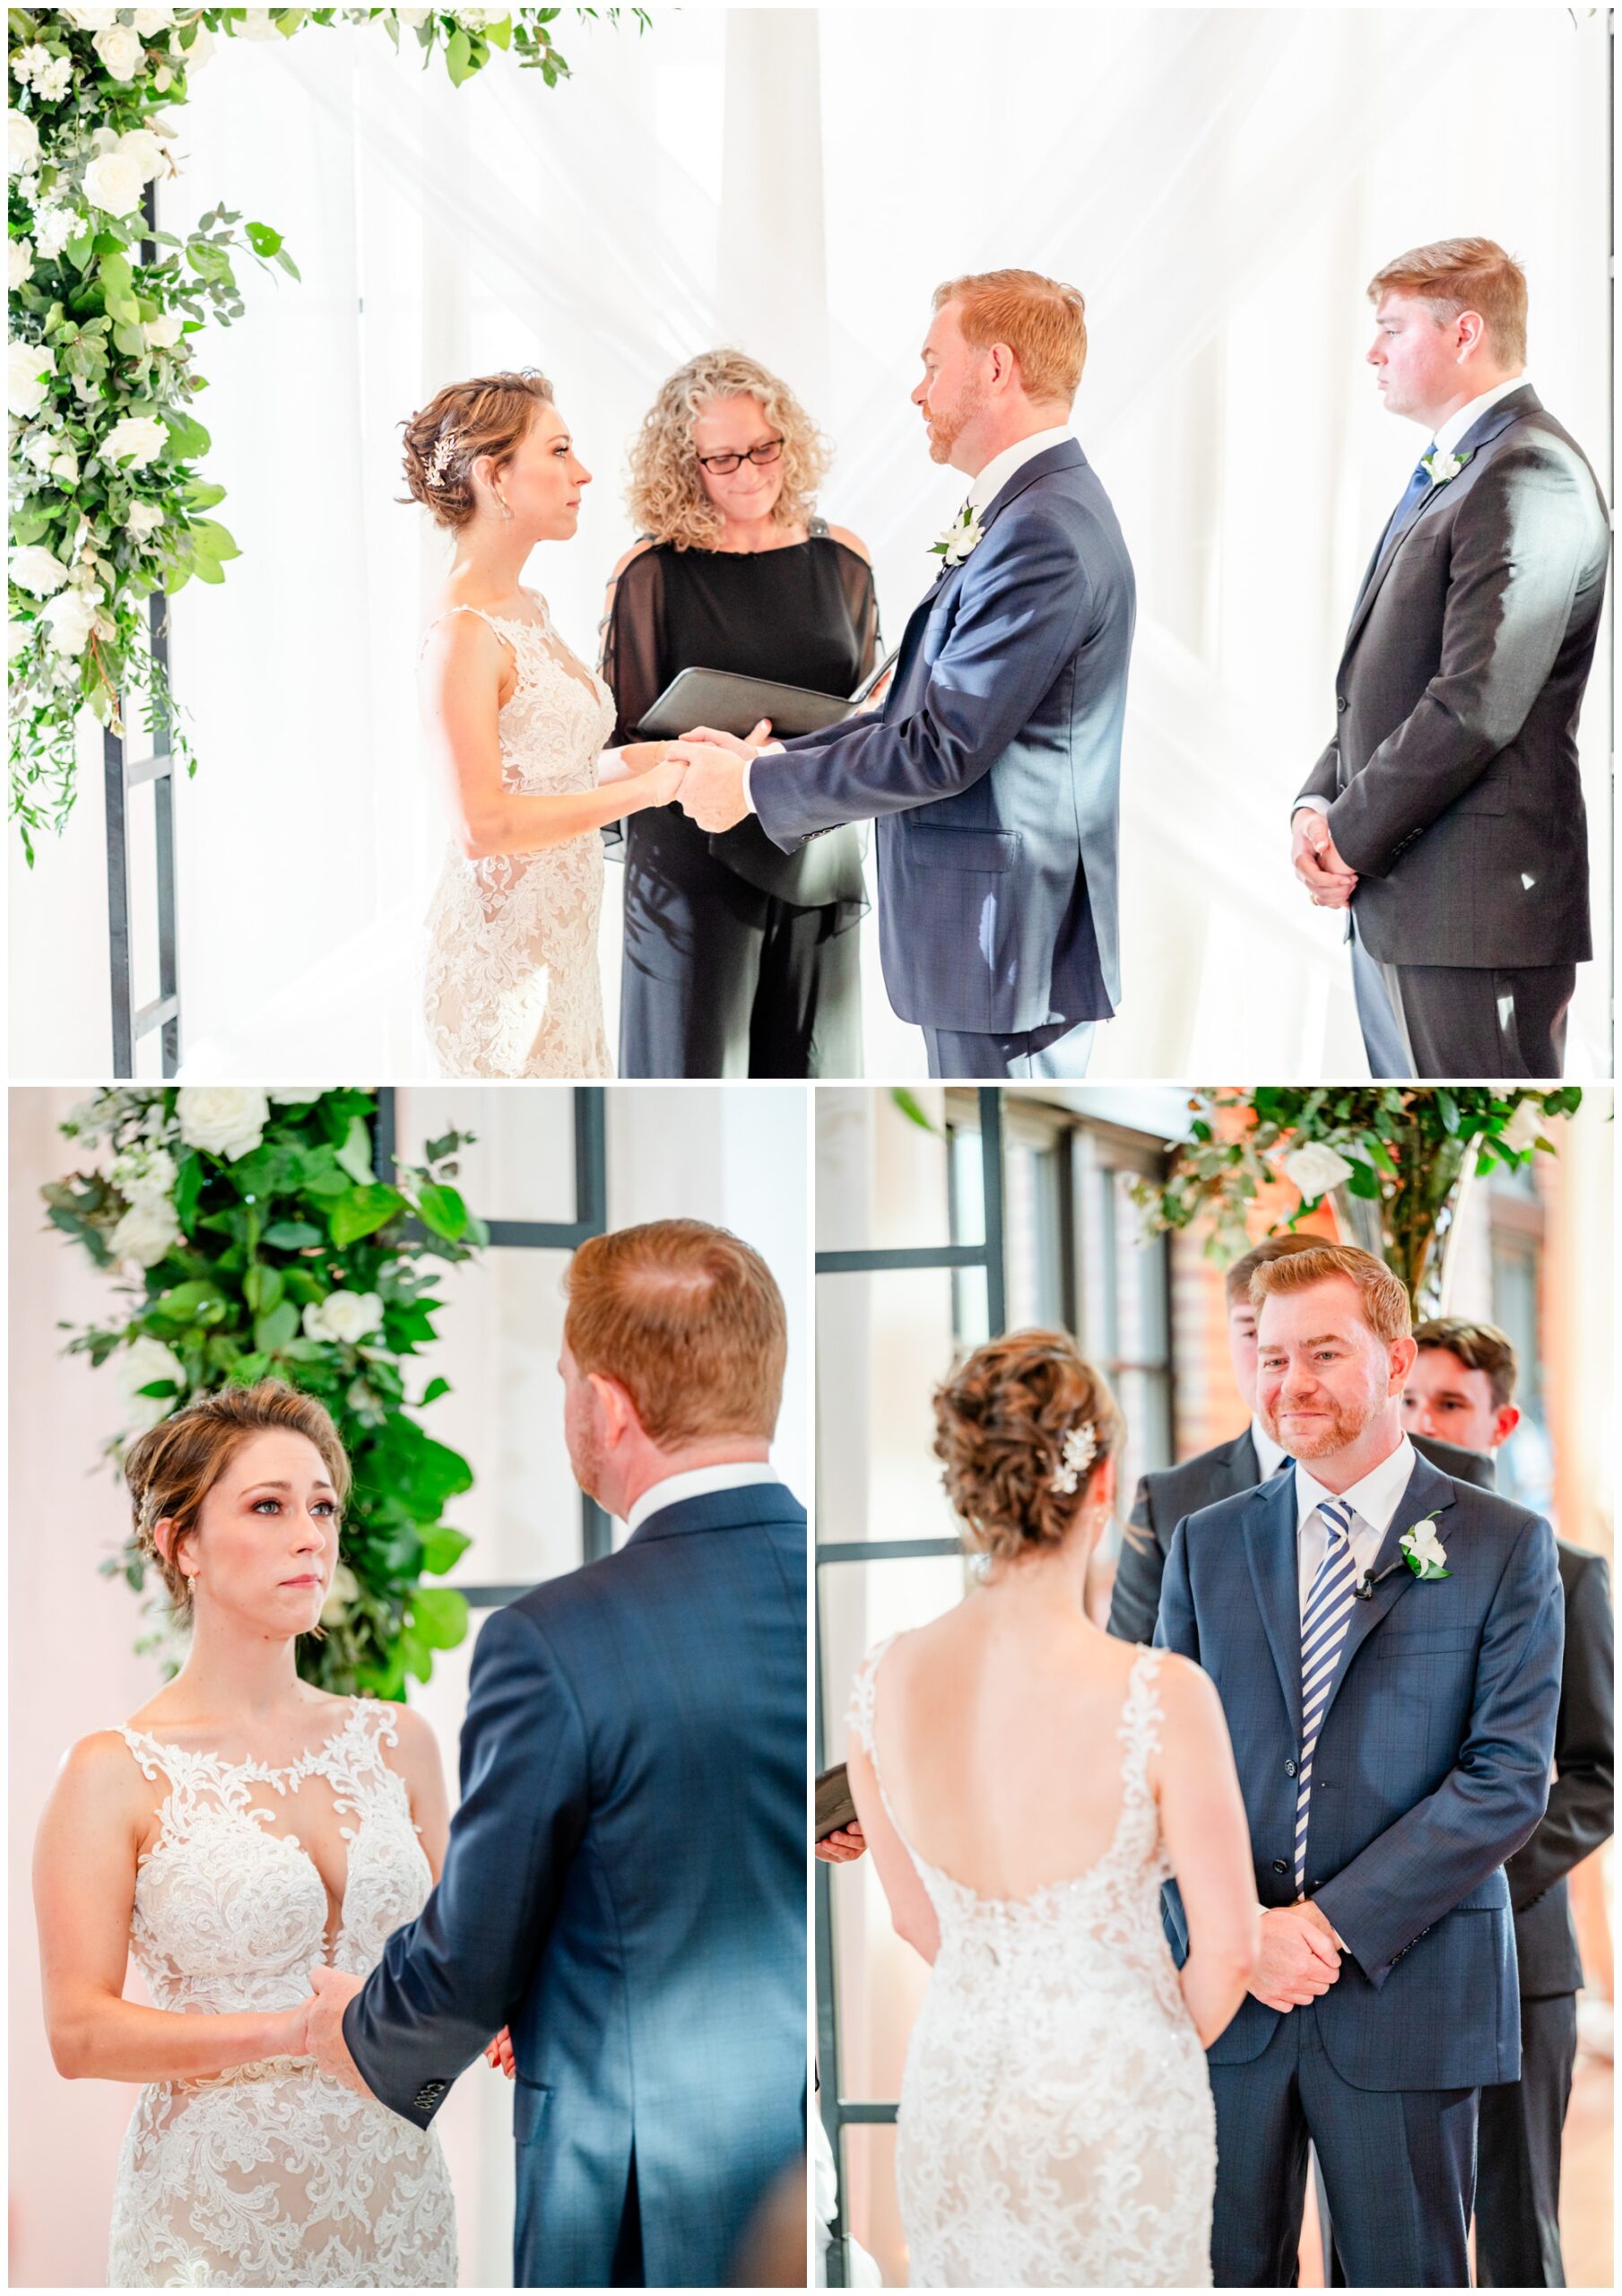 romantic Ritz Carlton Georgetown wedding, summer wedding aesthetic, green and white aesthetic, summer D.C. wedding, D.C. wedding venues, Ritz Carlton wedding, Washington D.C. wedding, romantic wedding aesthetic, Georgetown wedding, Rachel E.H. Photography, D.C. photographer, couple at alter, groom tearing up, couple holding hands at alter